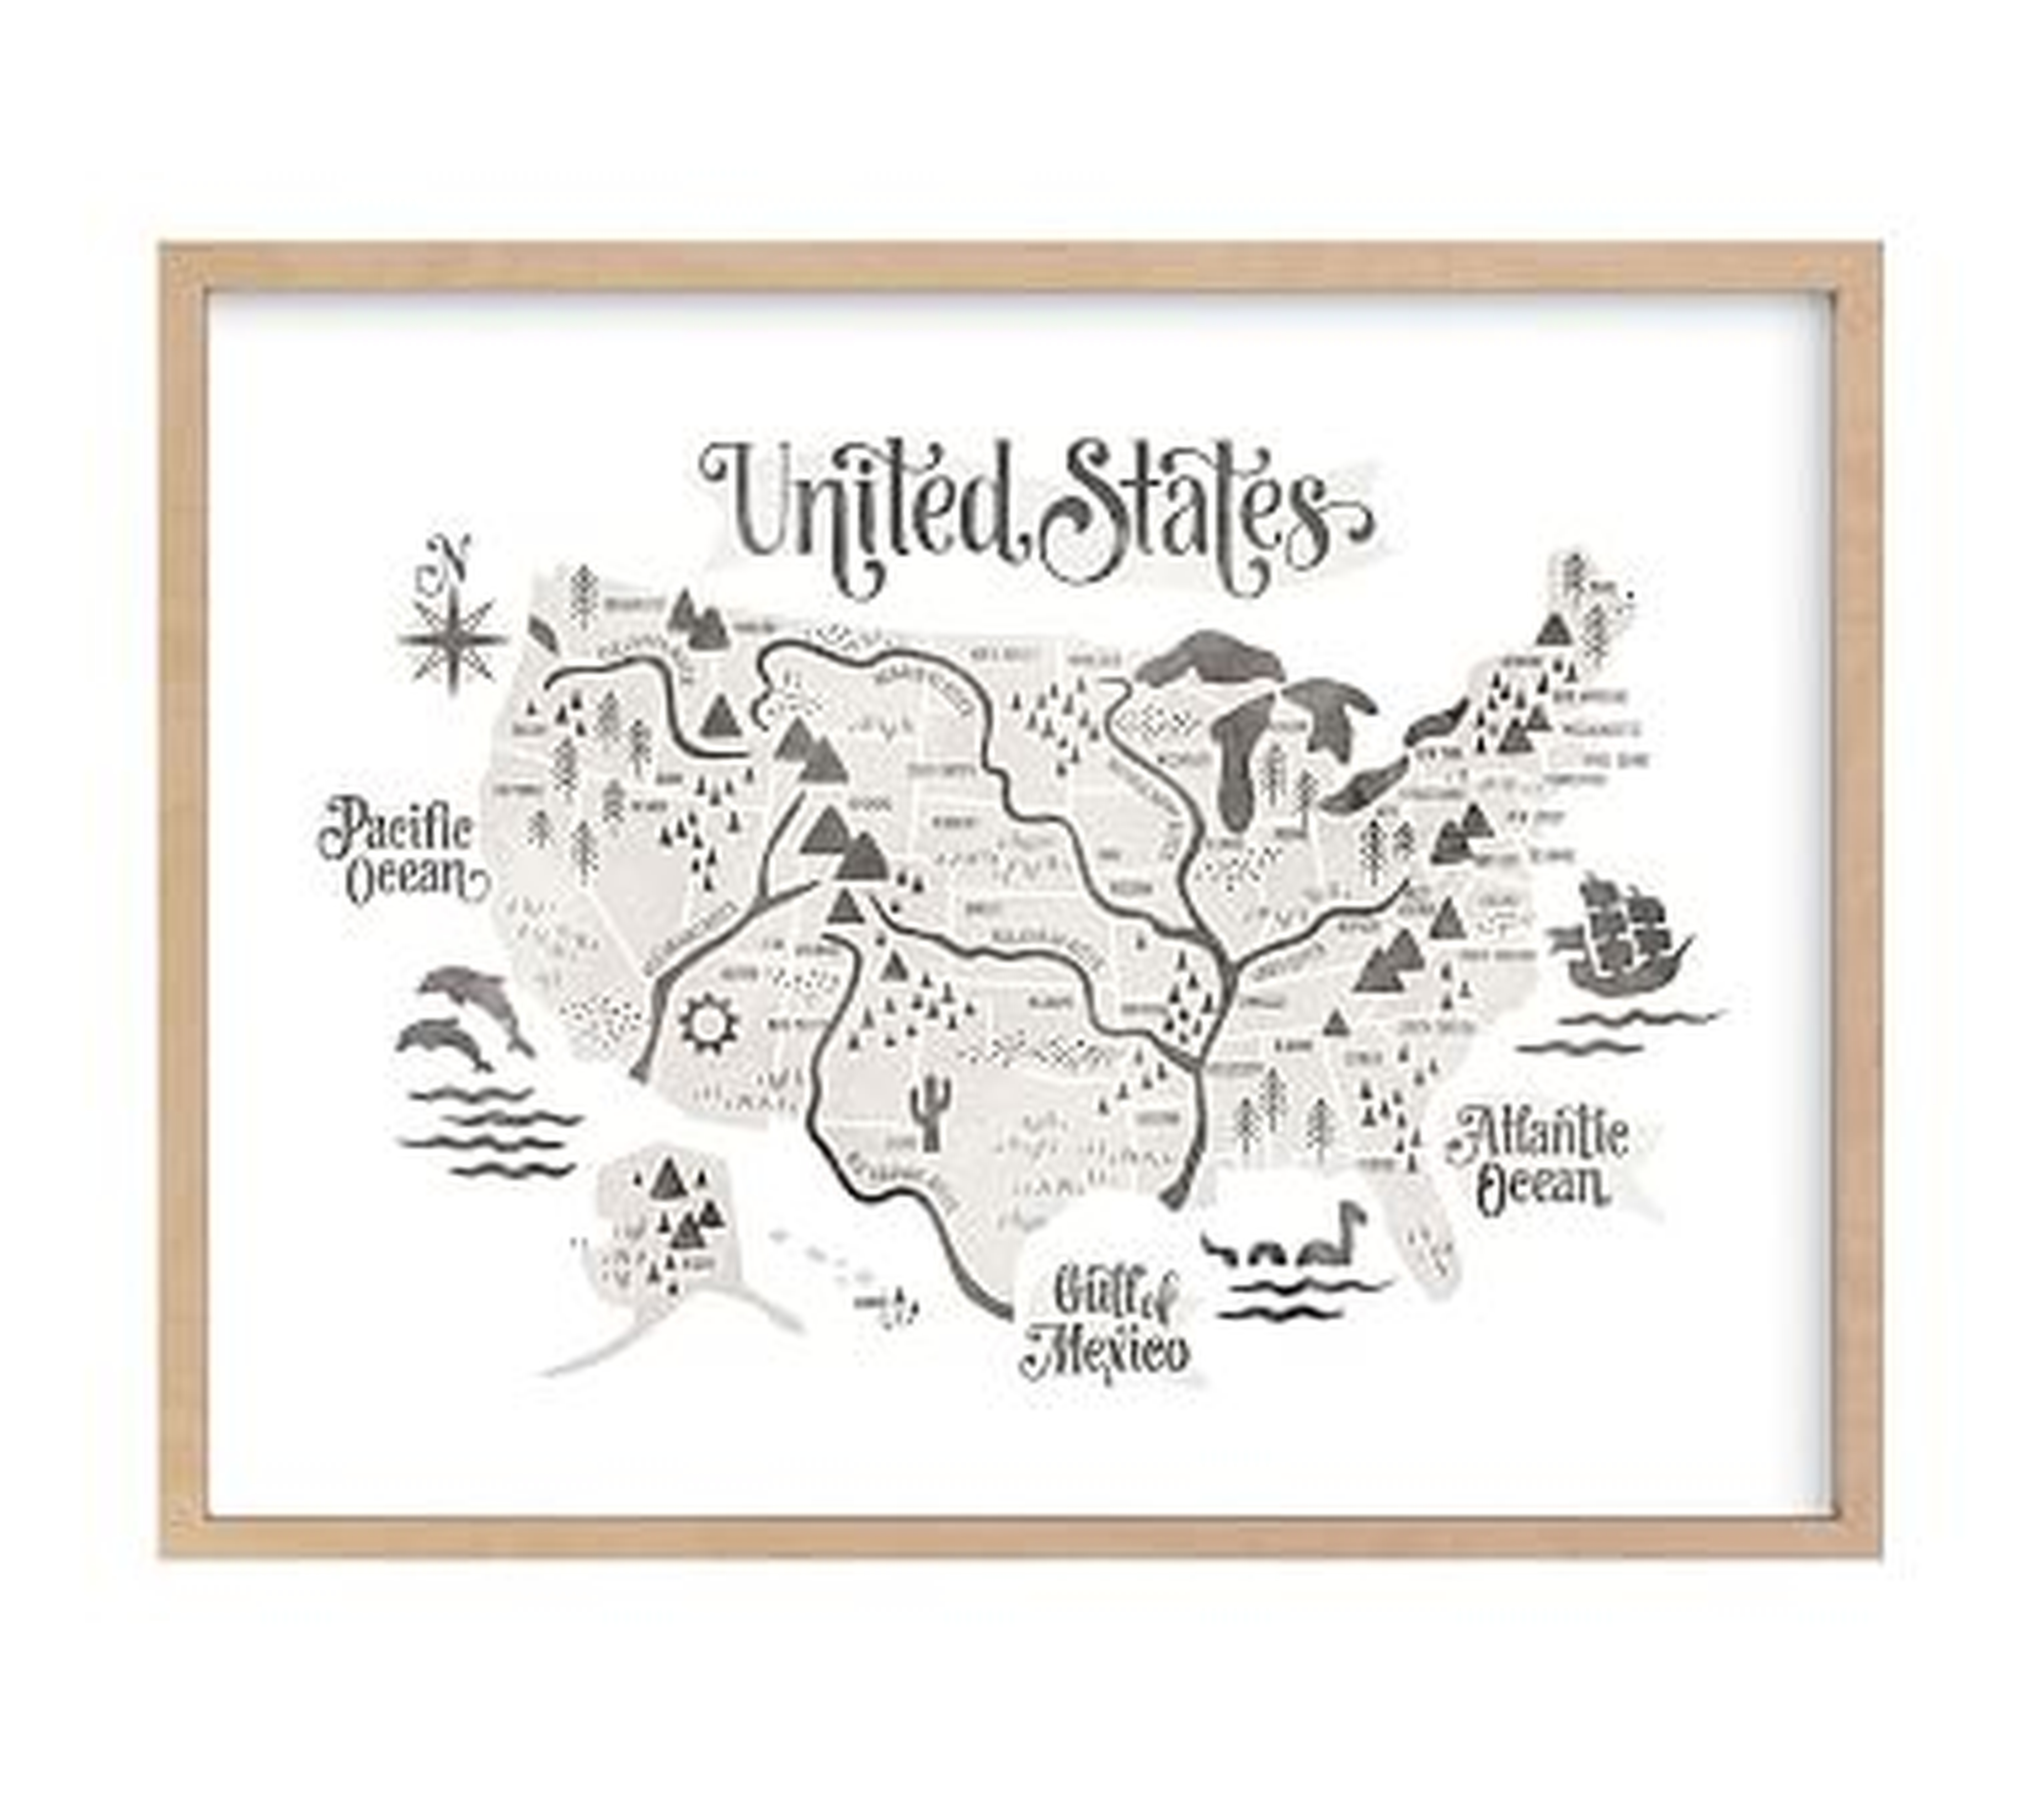 Pirate Map Wall Art by Minted(R), Natural, 40x30 - Pottery Barn Kids